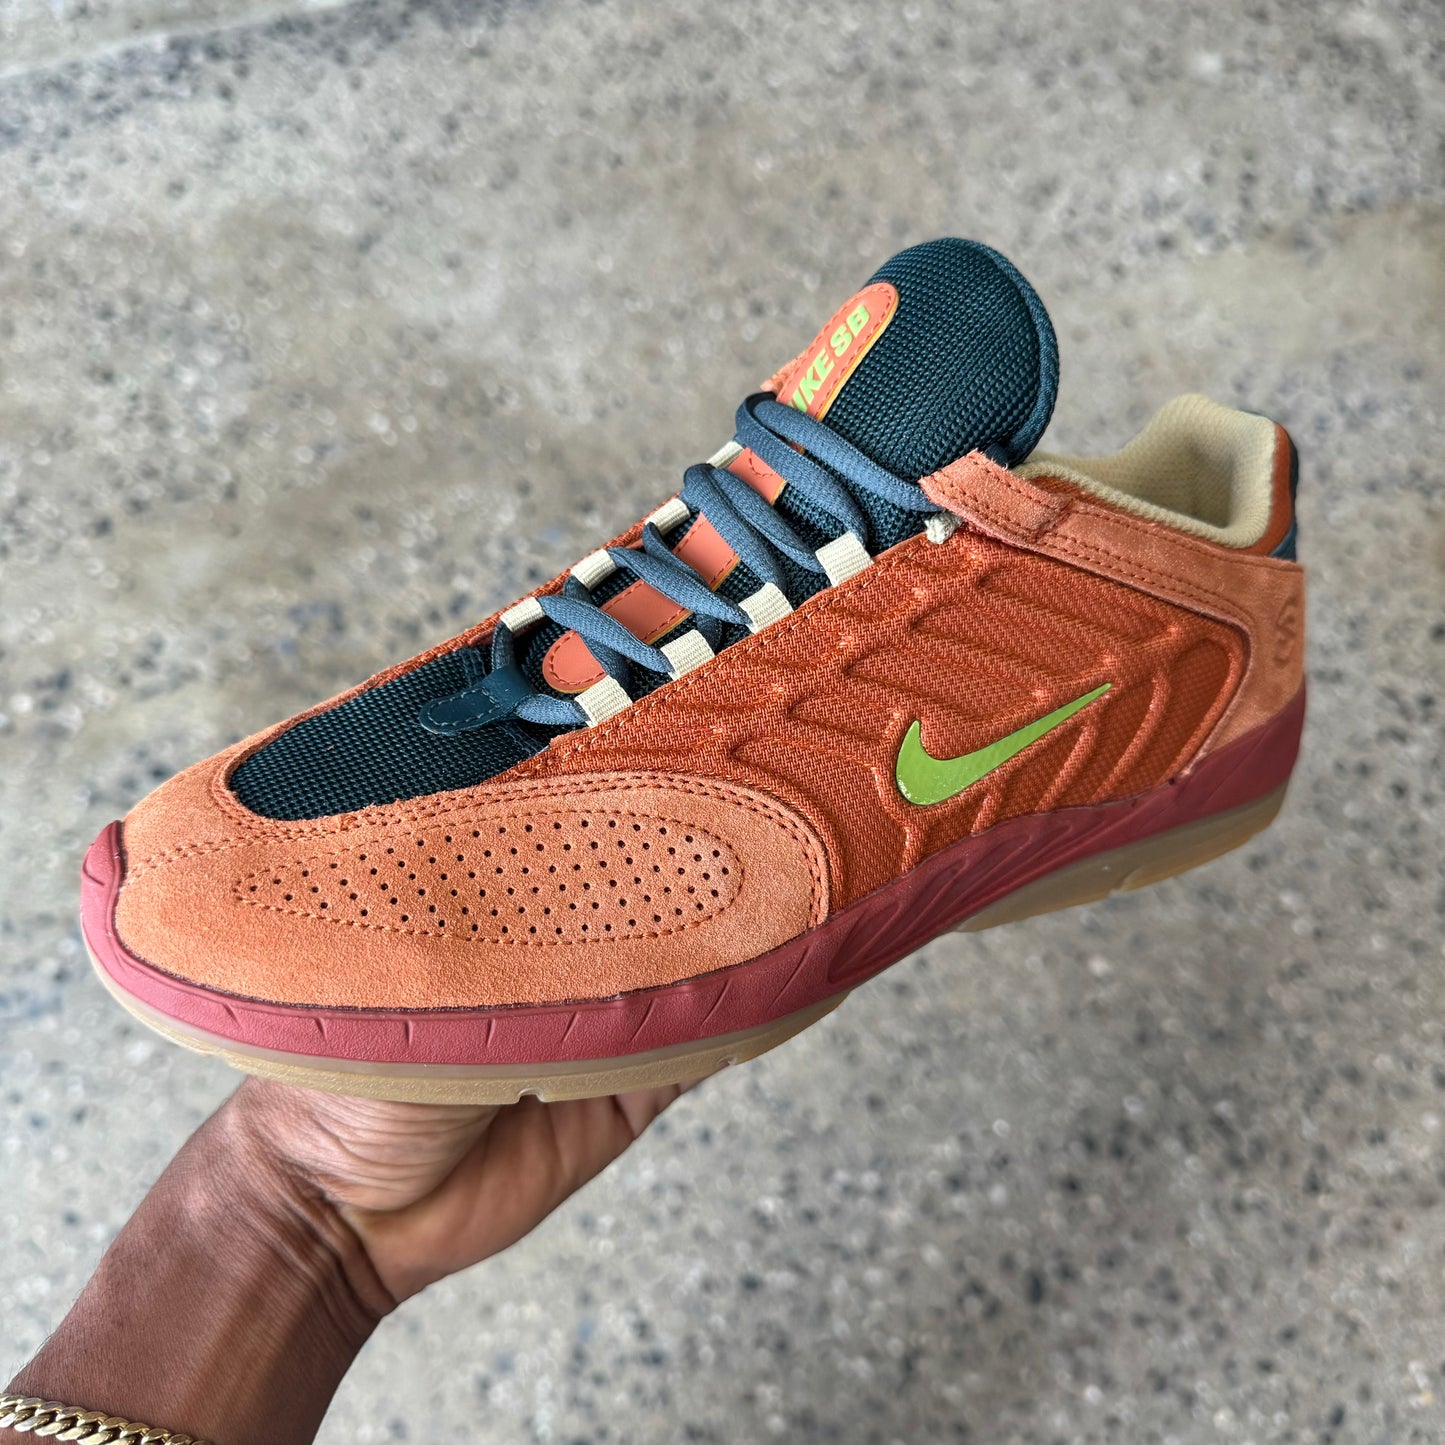 rust colored shoe with pea green nike logo and gum sole